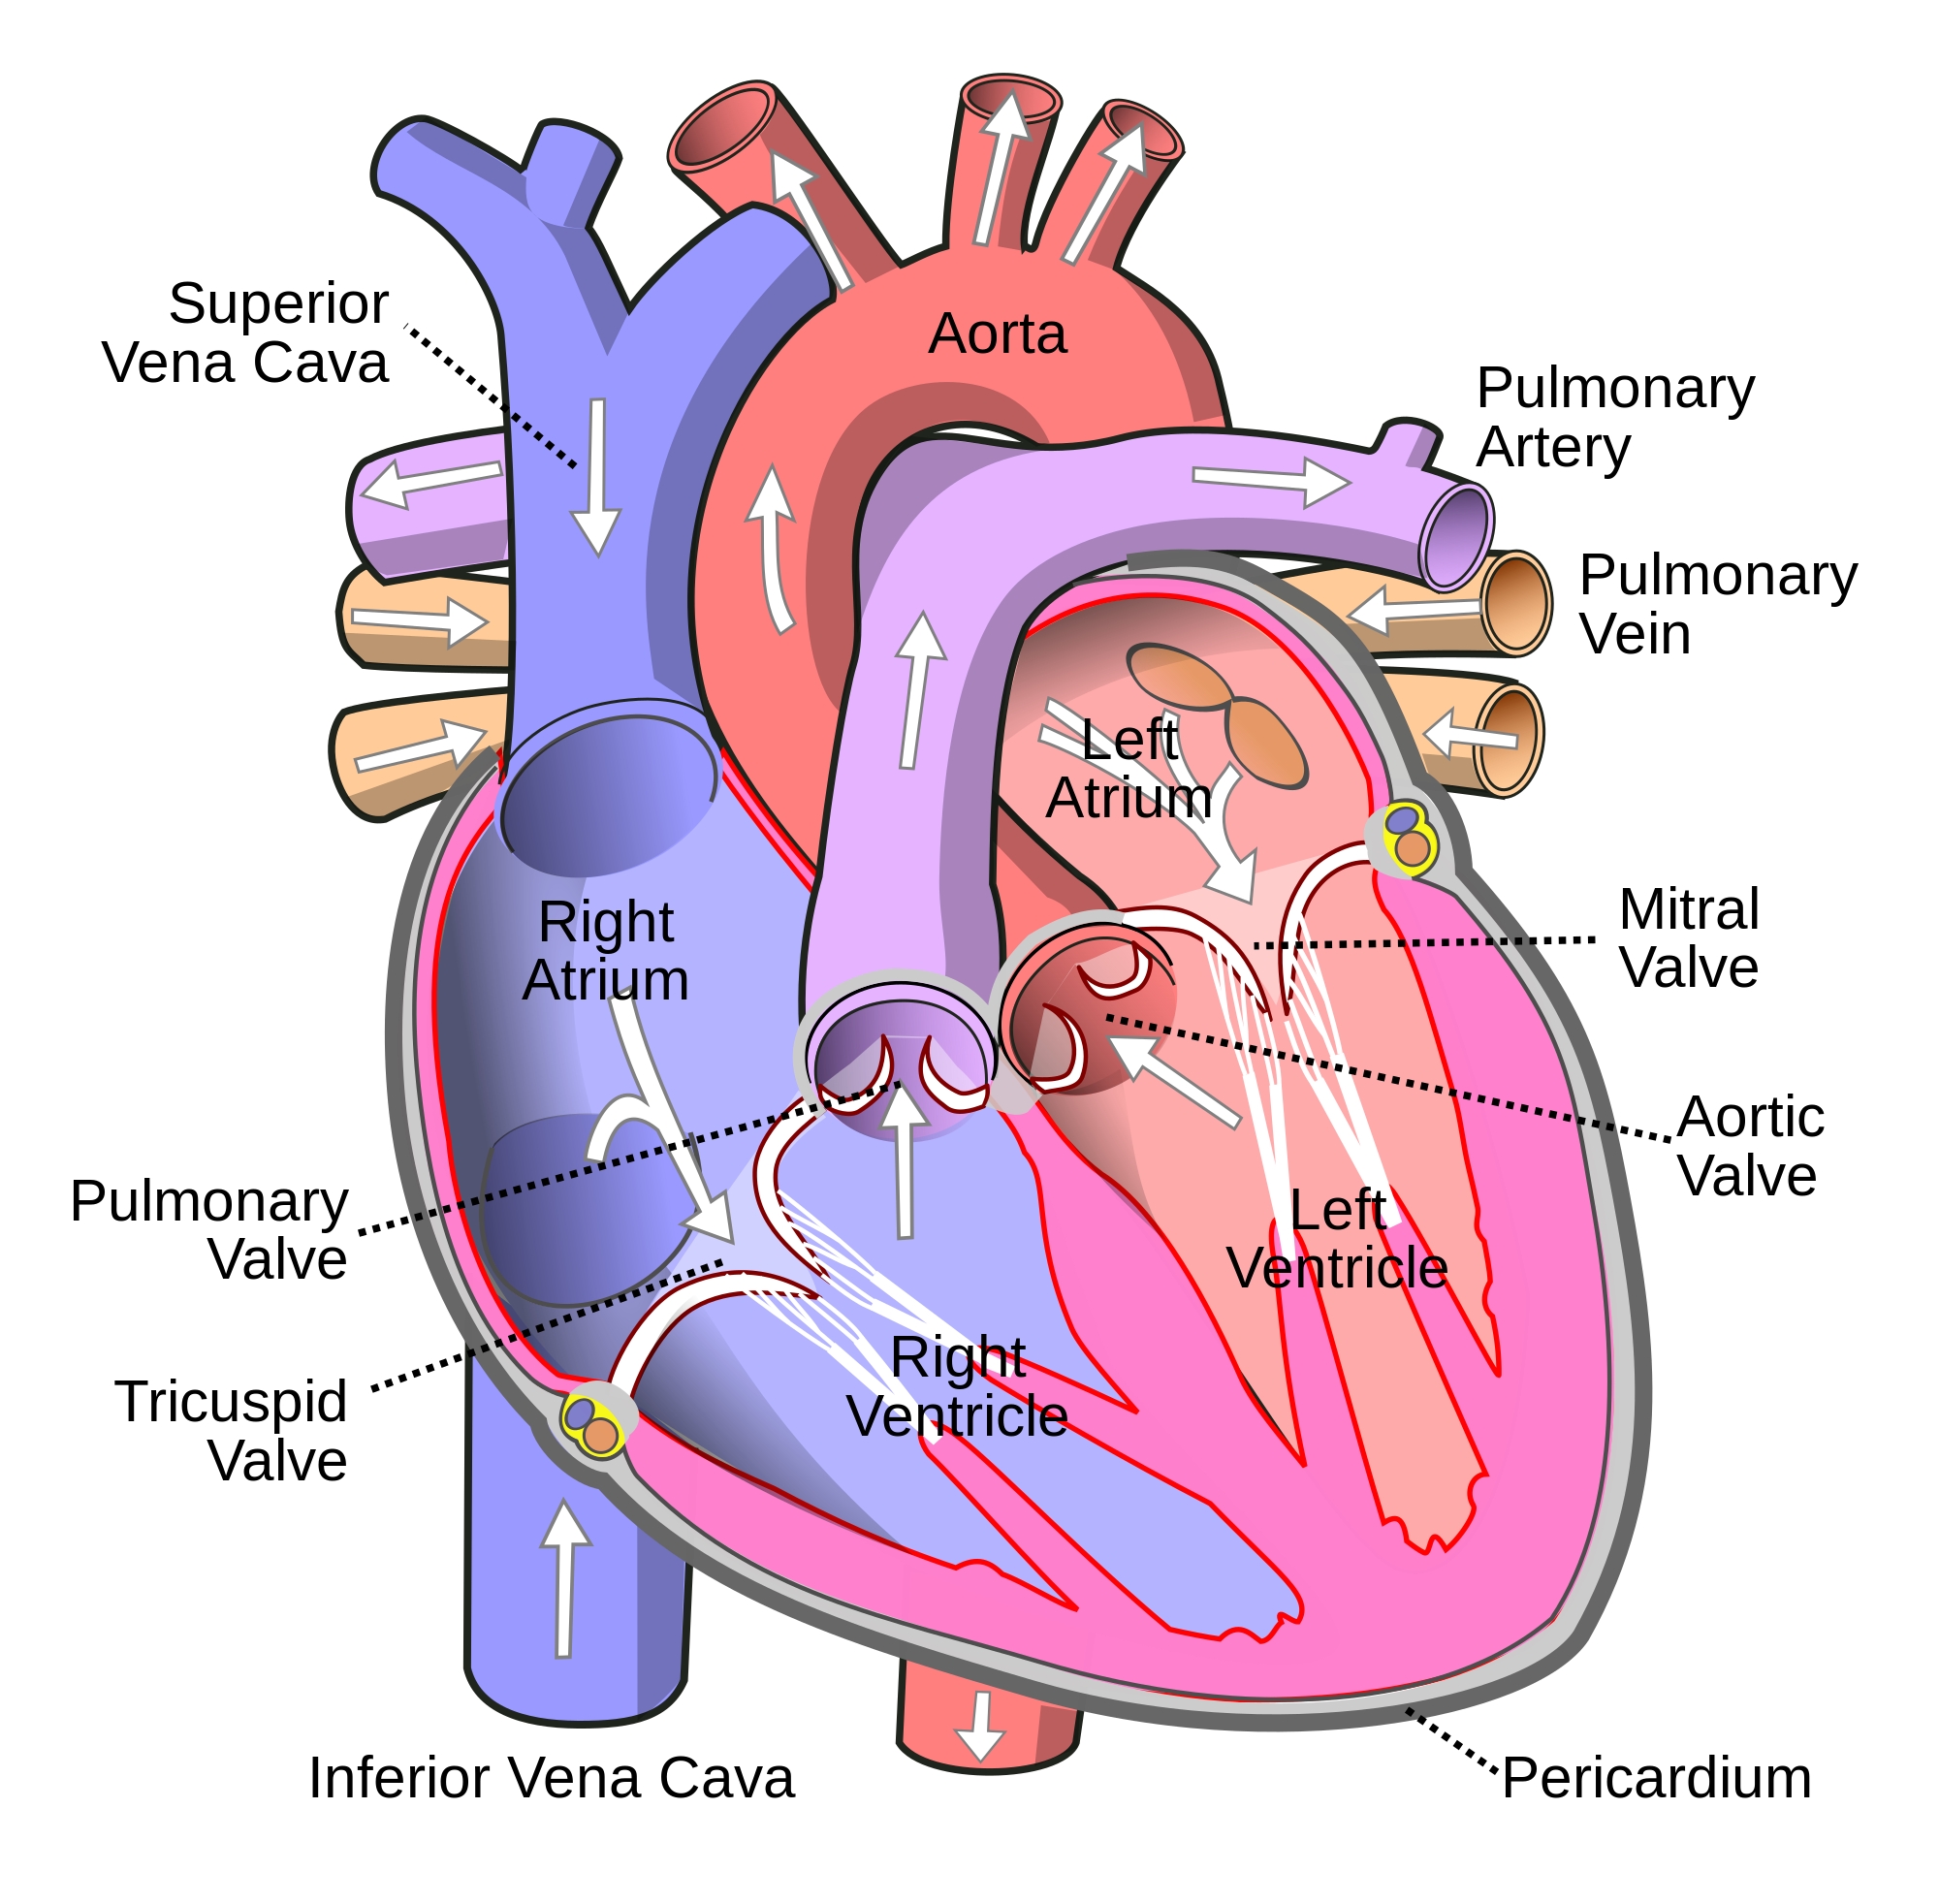 Components of the heart